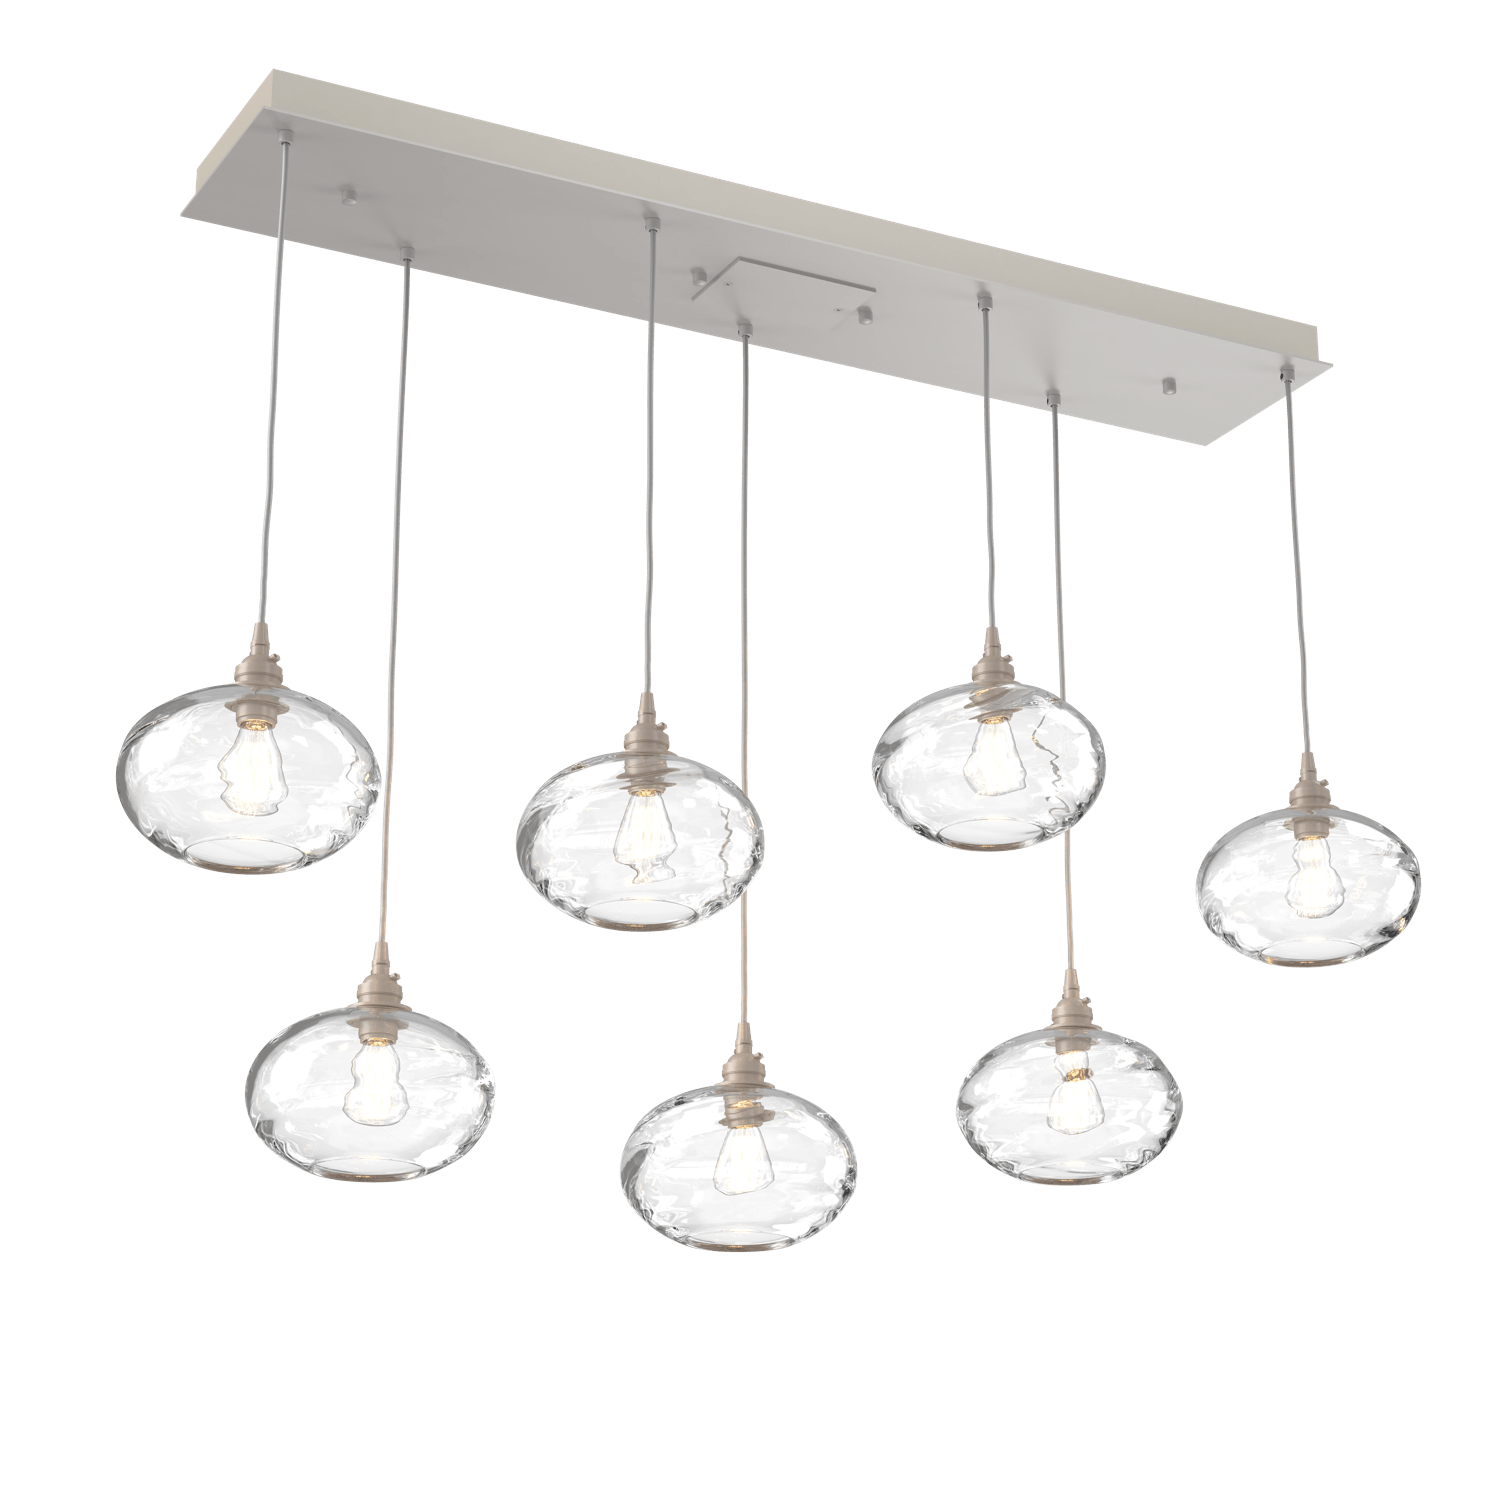 PLB0036-07-BS-OC-Hammerton-Studio-Optic-Blown-Glass-Coppa-7-light-linear-pendant-chandelier-with-metallic-beige-silver-finish-and-optic-clear-blown-glass-shades-and-incandescent-lamping